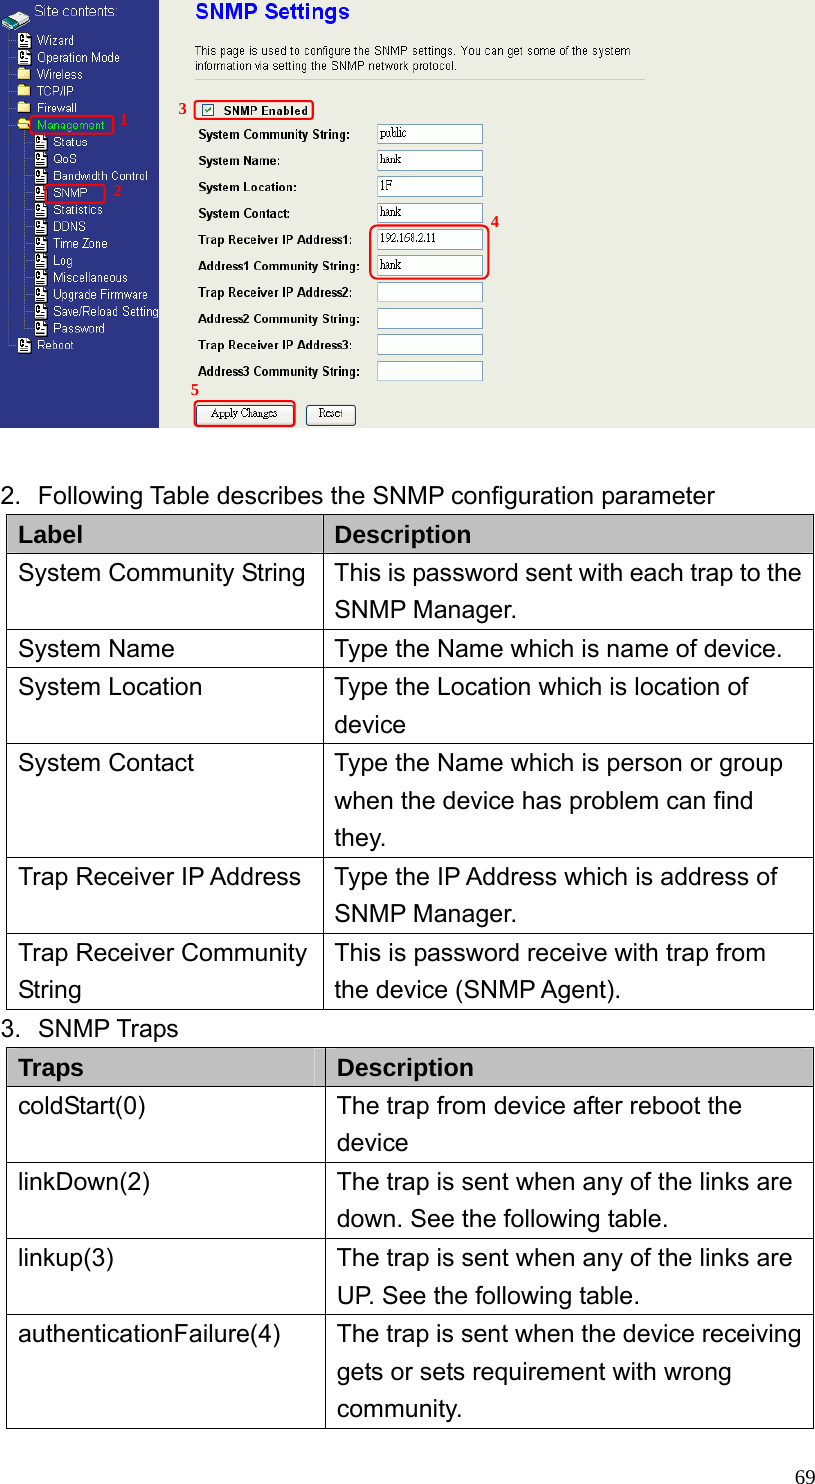  69  2.  Following Table describes the SNMP configuration parameter Label  Description System Community String This is password sent with each trap to the SNMP Manager. System Name  Type the Name which is name of device. System Location  Type the Location which is location of device System Contact  Type the Name which is person or group when the device has problem can find they. Trap Receiver IP Address  Type the IP Address which is address of SNMP Manager. Trap Receiver Community String This is password receive with trap from the device (SNMP Agent). 3. SNMP Traps Traps  Description coldStart(0)  The trap from device after reboot the device linkDown(2)  The trap is sent when any of the links are down. See the following table. linkup(3)  The trap is sent when any of the links are UP. See the following table. authenticationFailure(4)  The trap is sent when the device receiving gets or sets requirement with wrong community. 12 345 